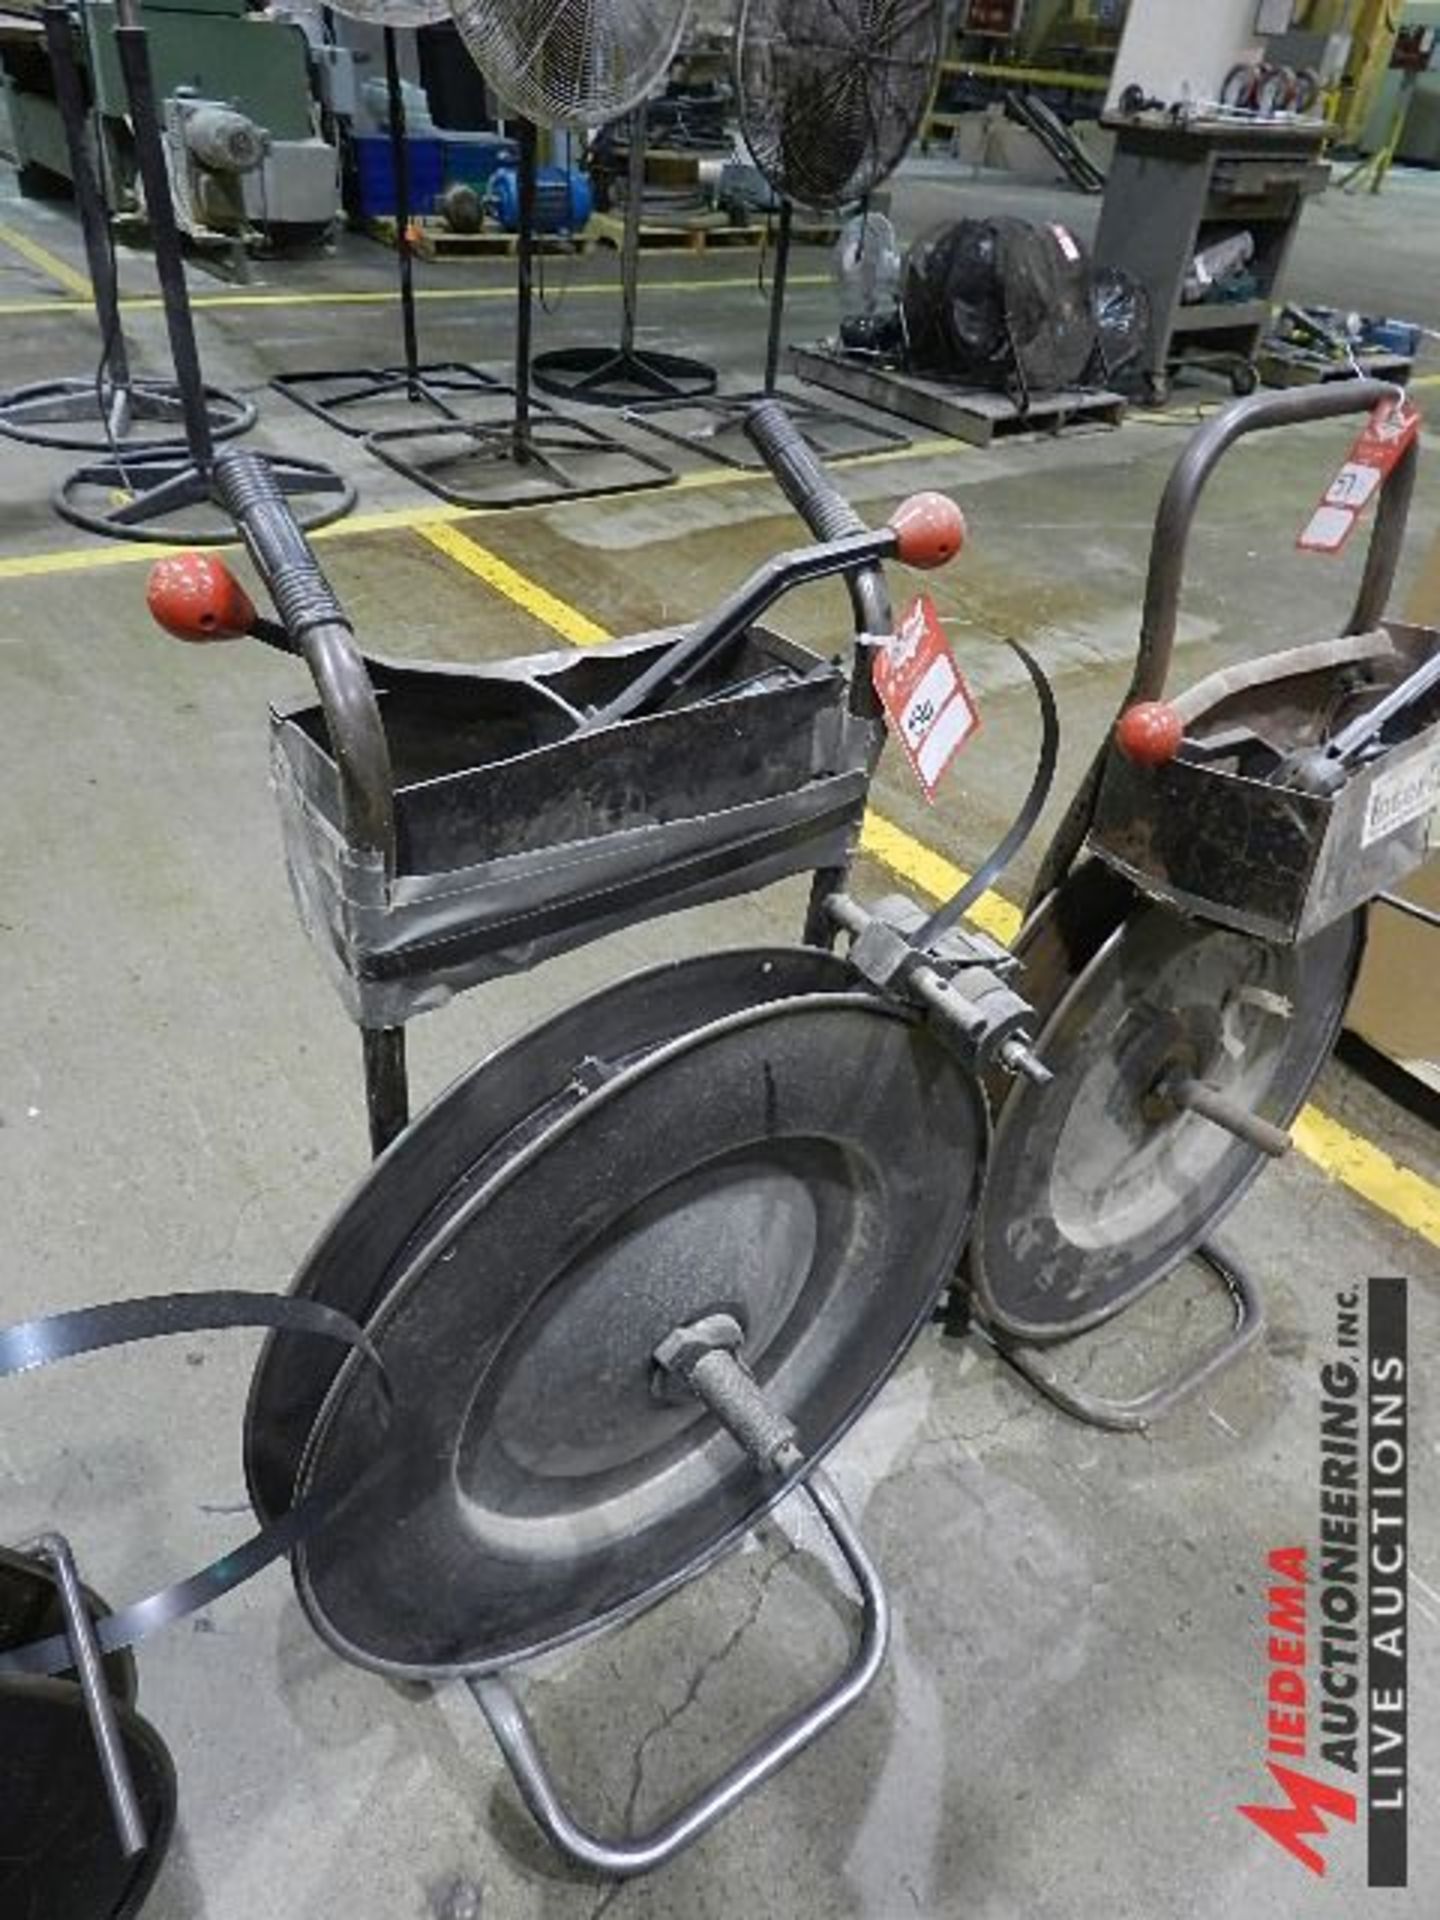 METAL BANDING CART WITH HAND TOOLS